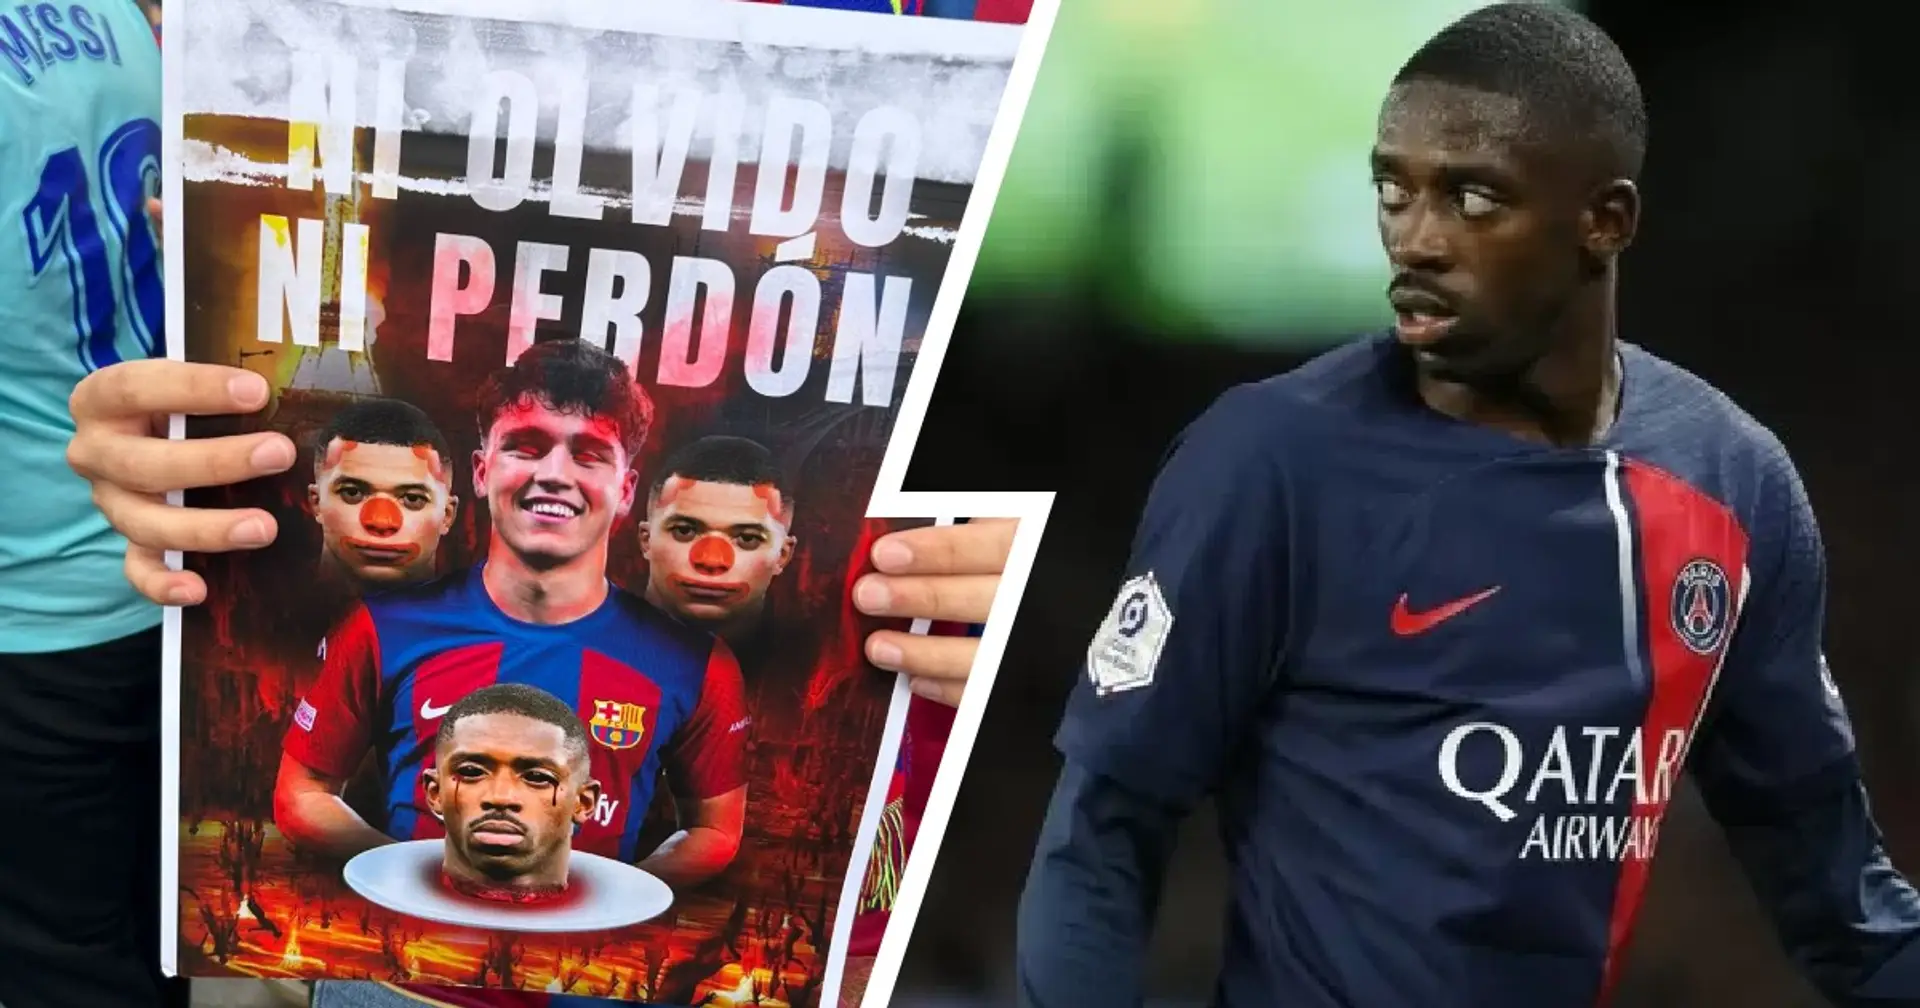 'Neither forget nor forgive': Barca fans show no mercy for Dembele before PSG clash - 3 photos